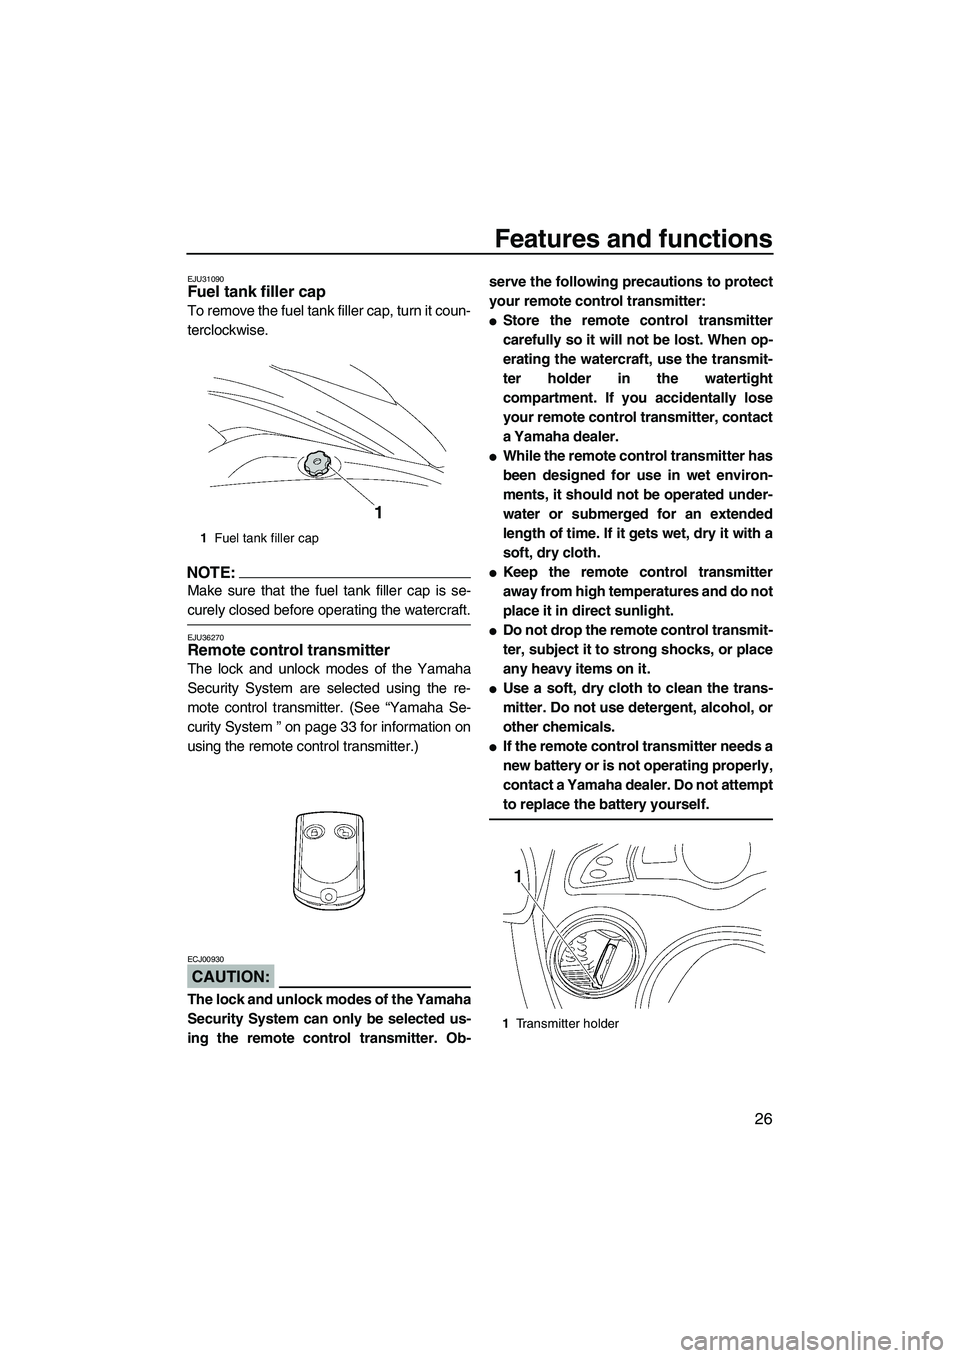 YAMAHA FX HO 2007  Owners Manual Features and functions
26
EJU31090Fuel tank filler cap 
To remove the fuel tank filler cap, turn it coun-
terclockwise.
NOTE:
Make sure that the fuel tank filler cap is se-
curely closed before operat